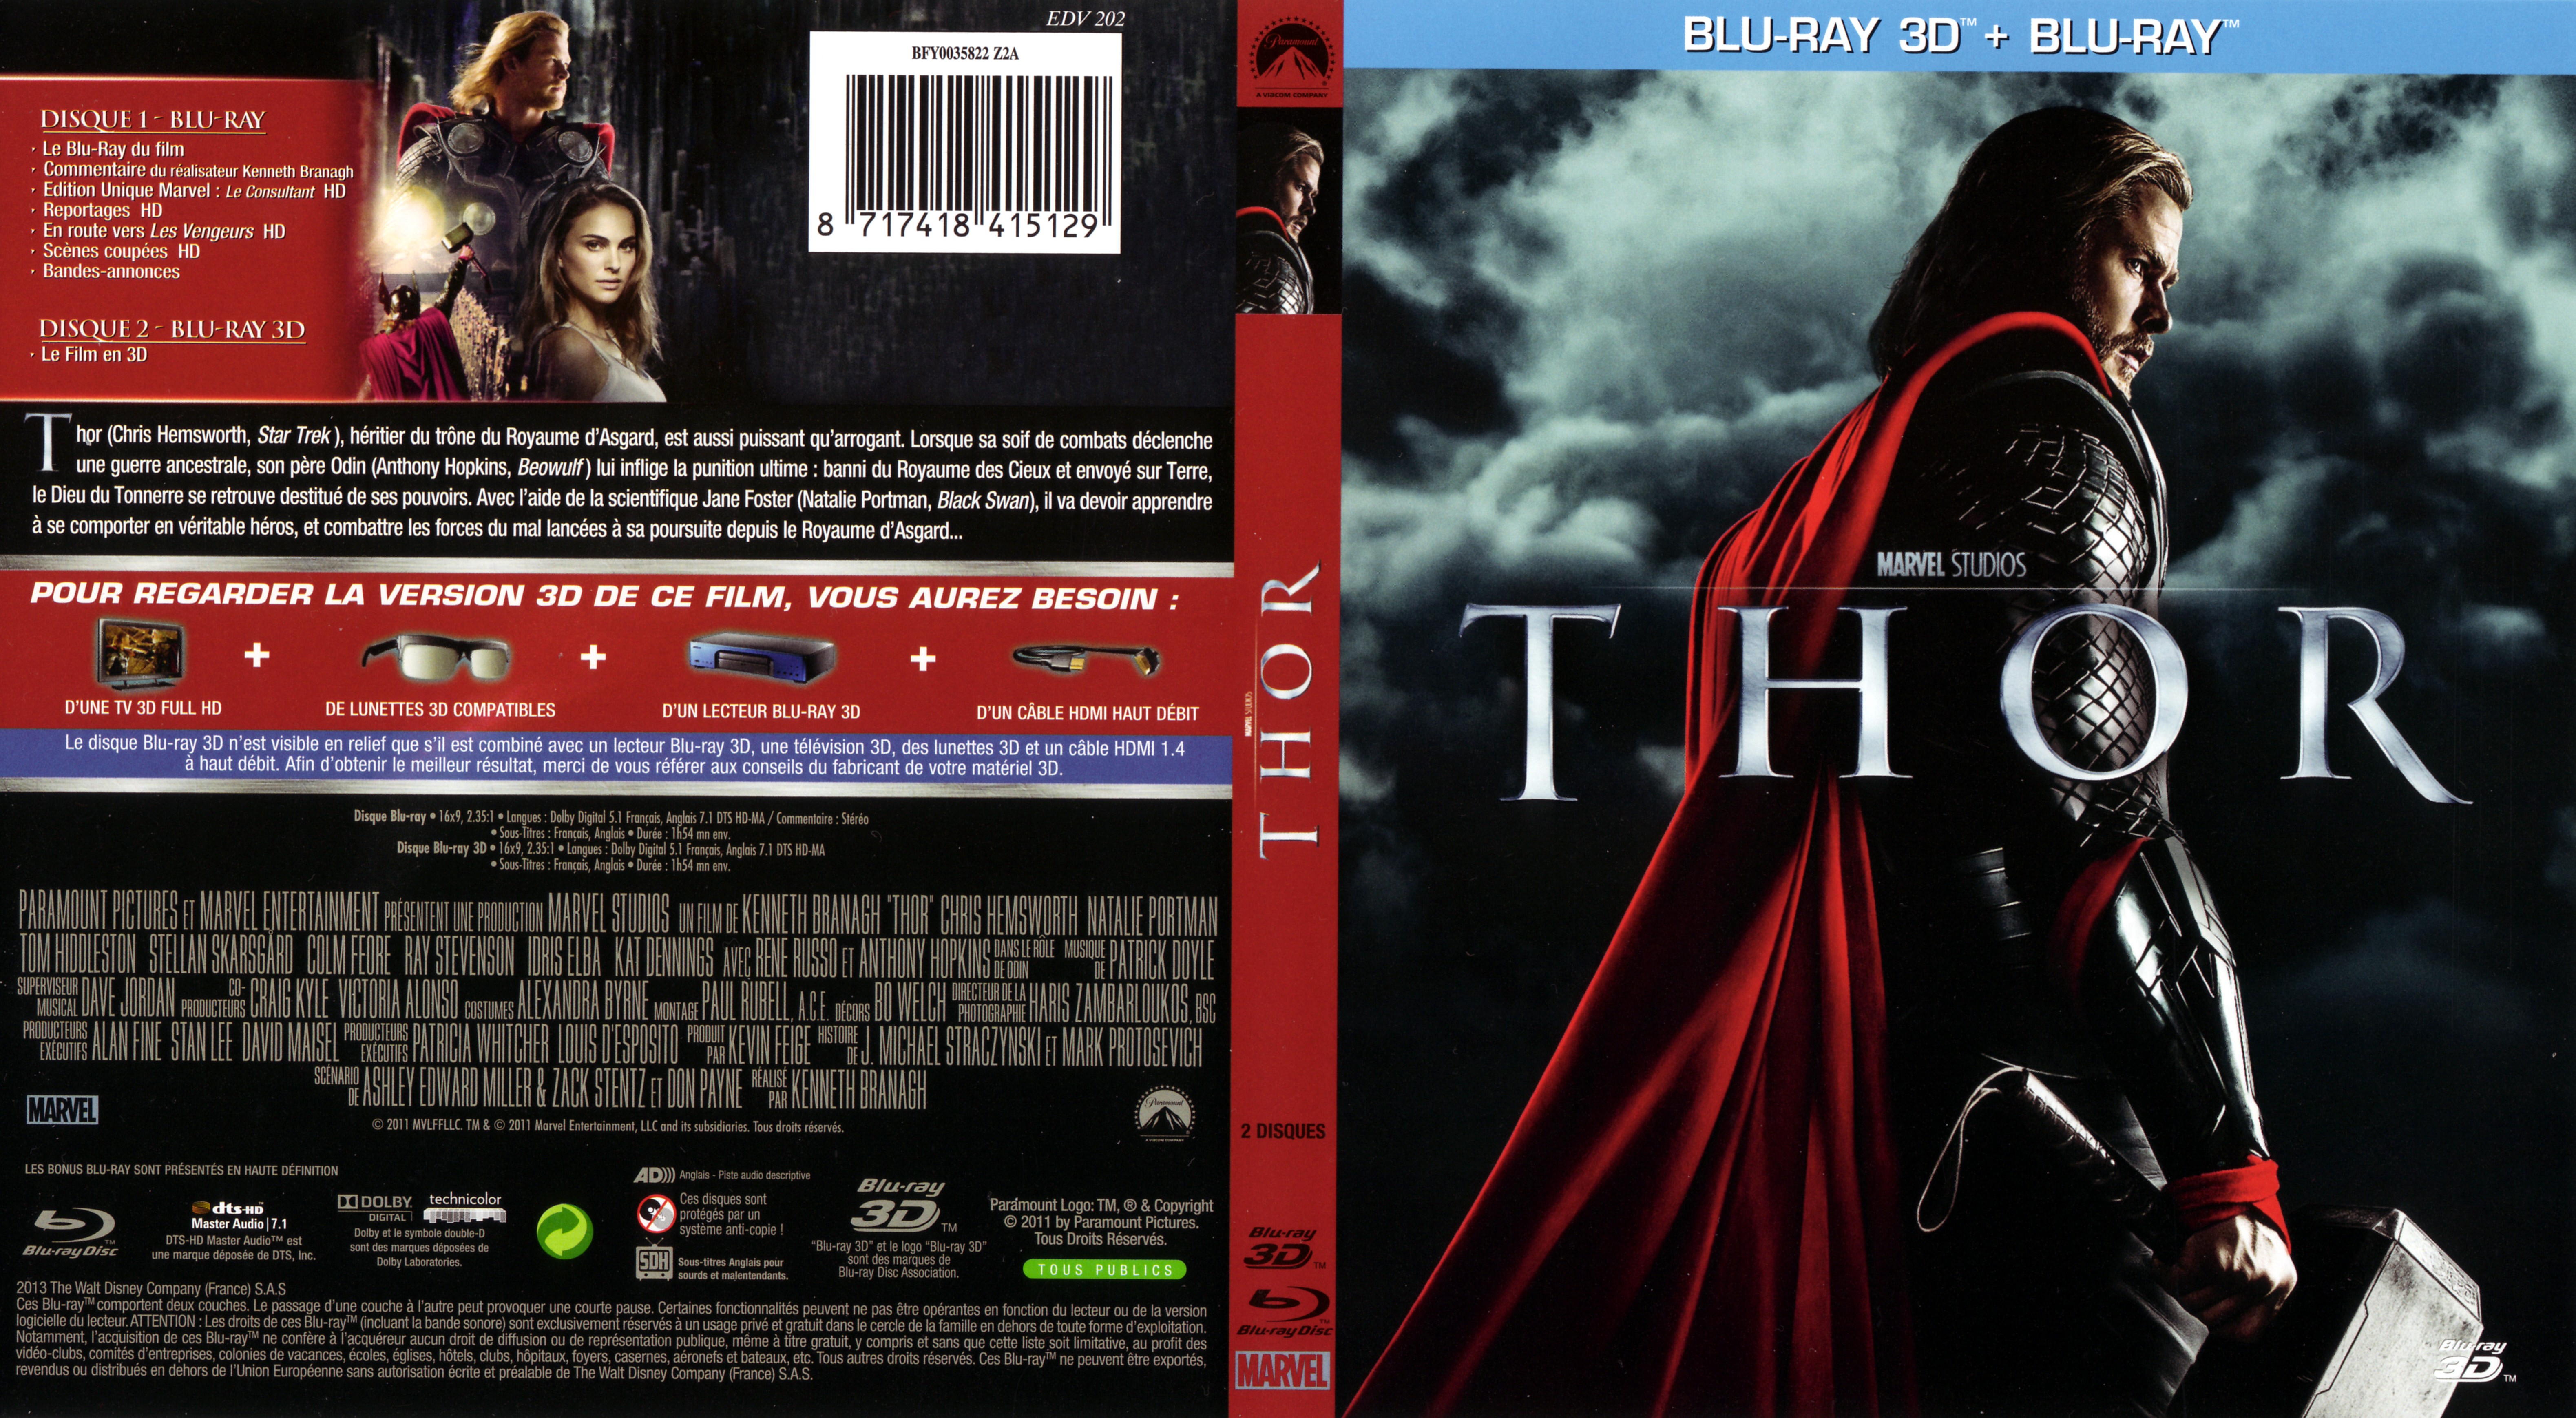 Jaquette DVD Thor 3D (BLU-RAY) v2